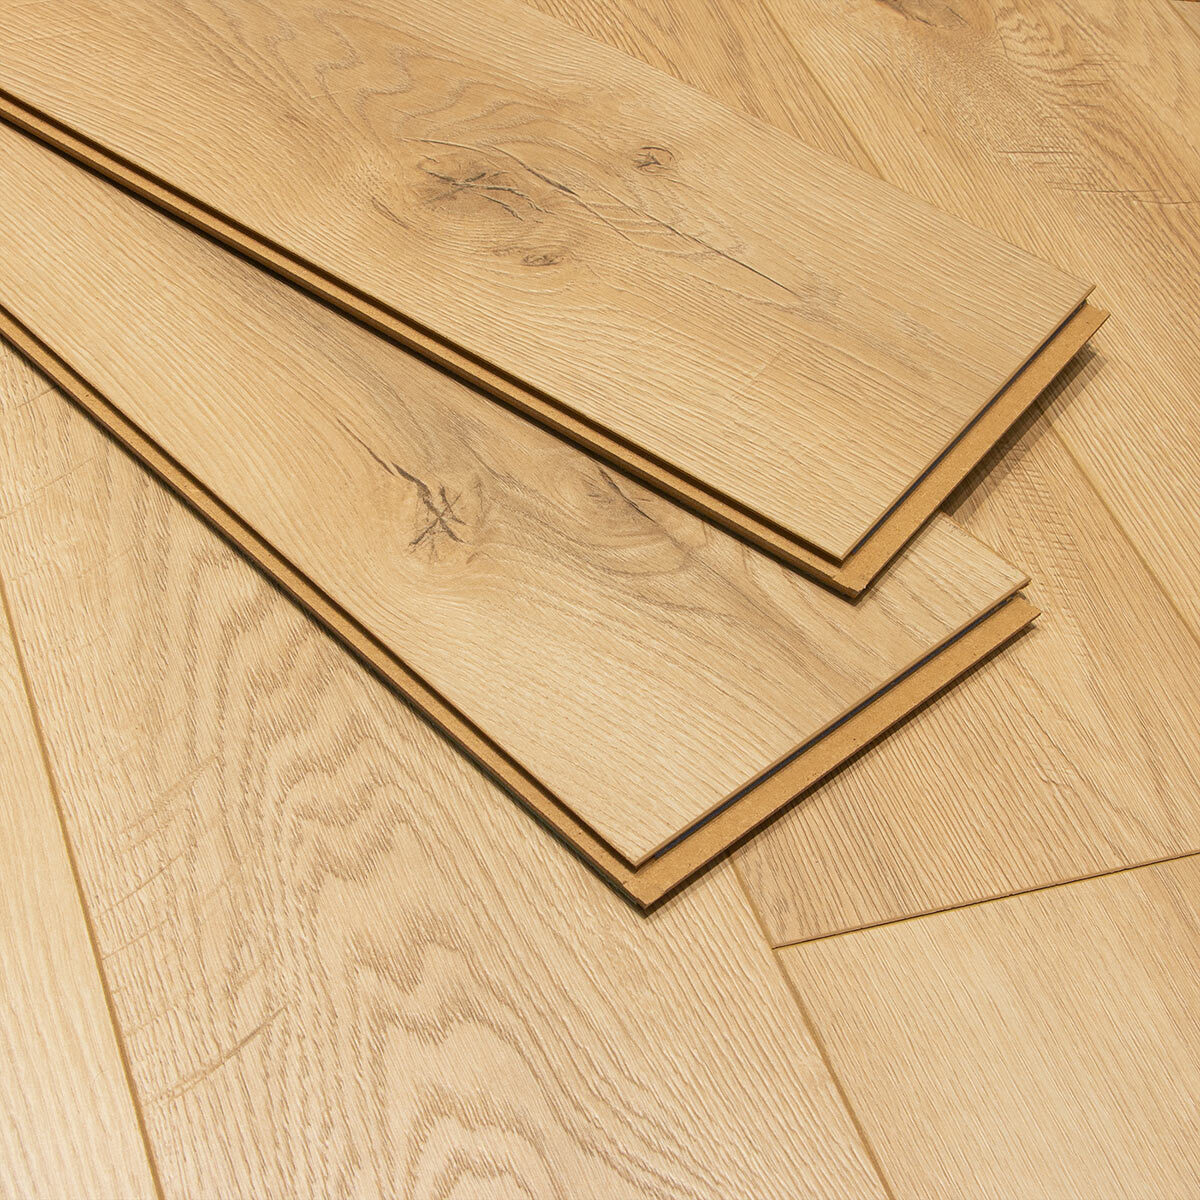 Close up image of laid down flooring with planks on top